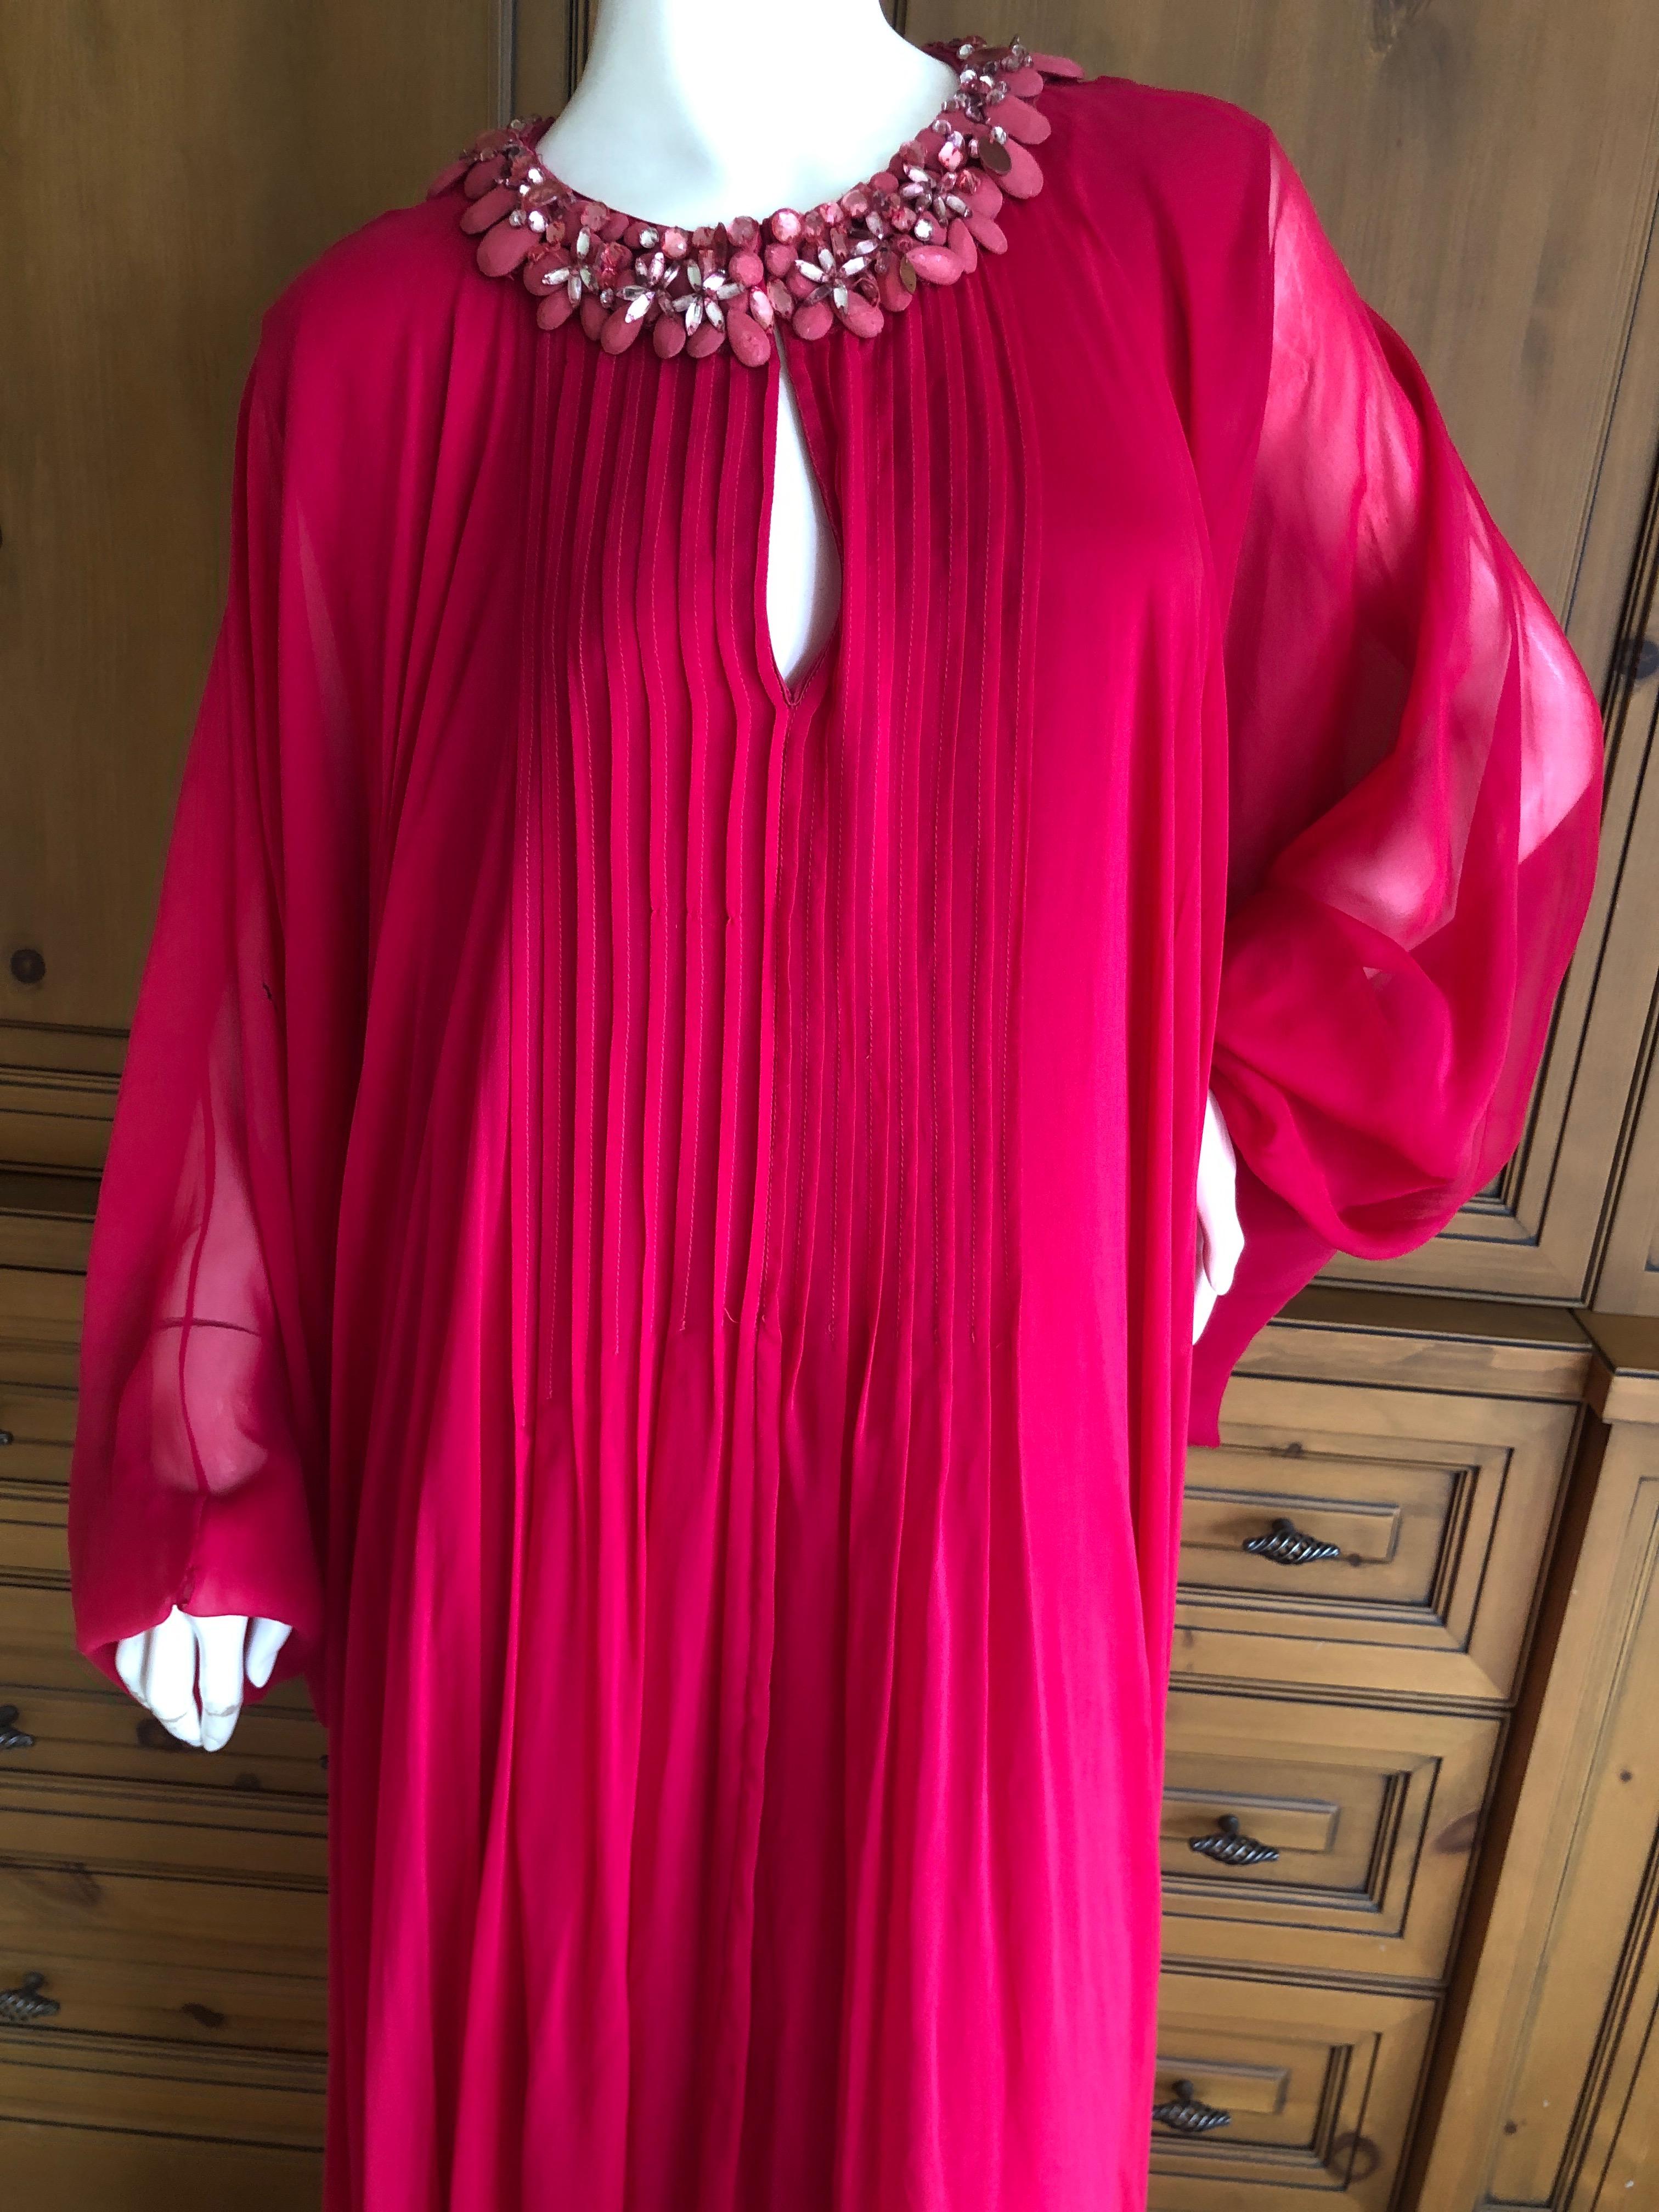 Oscar de la Renta Red Pleated Silk Chiffon Caftan with Jeweled Neckline In Excellent Condition For Sale In Cloverdale, CA